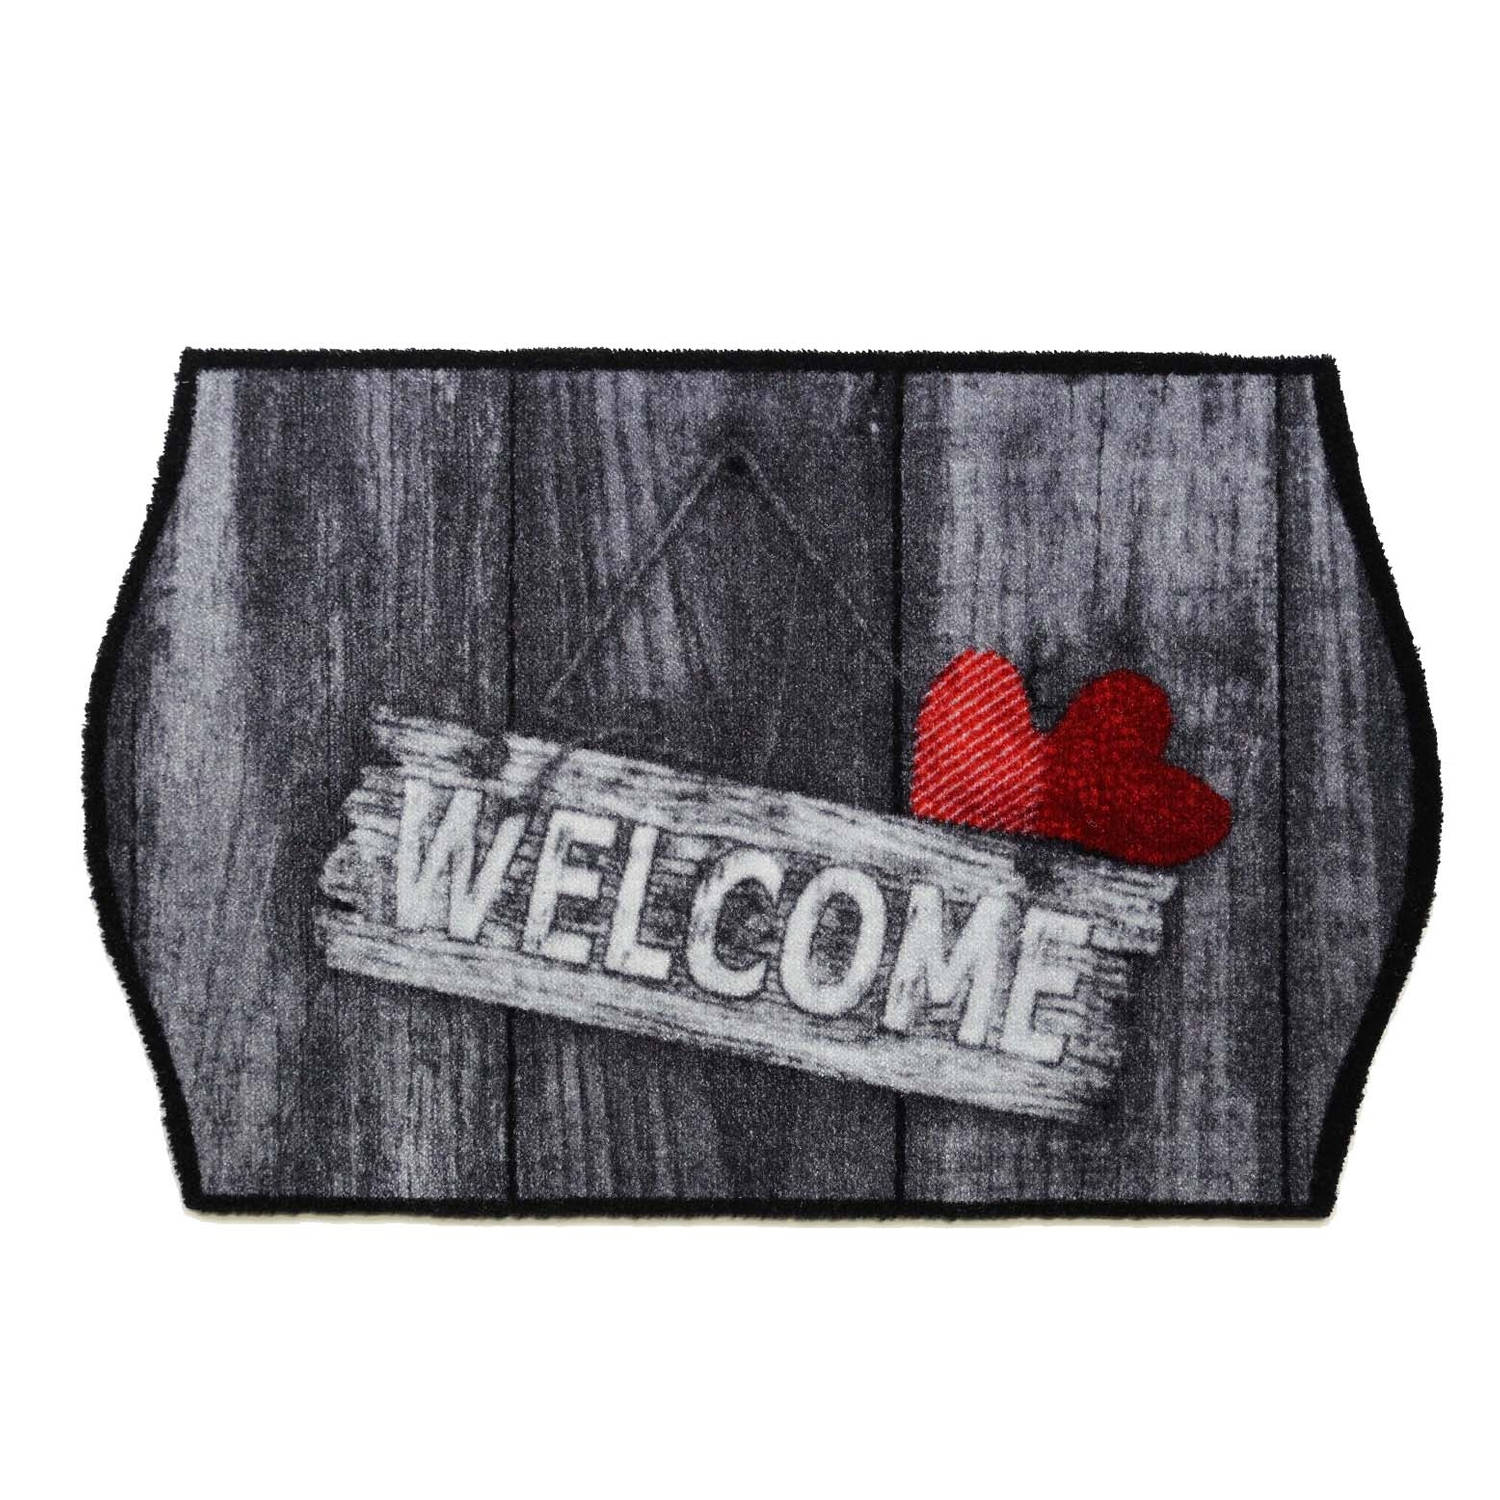 Droogloopmat welcome hearts 50x75 cm